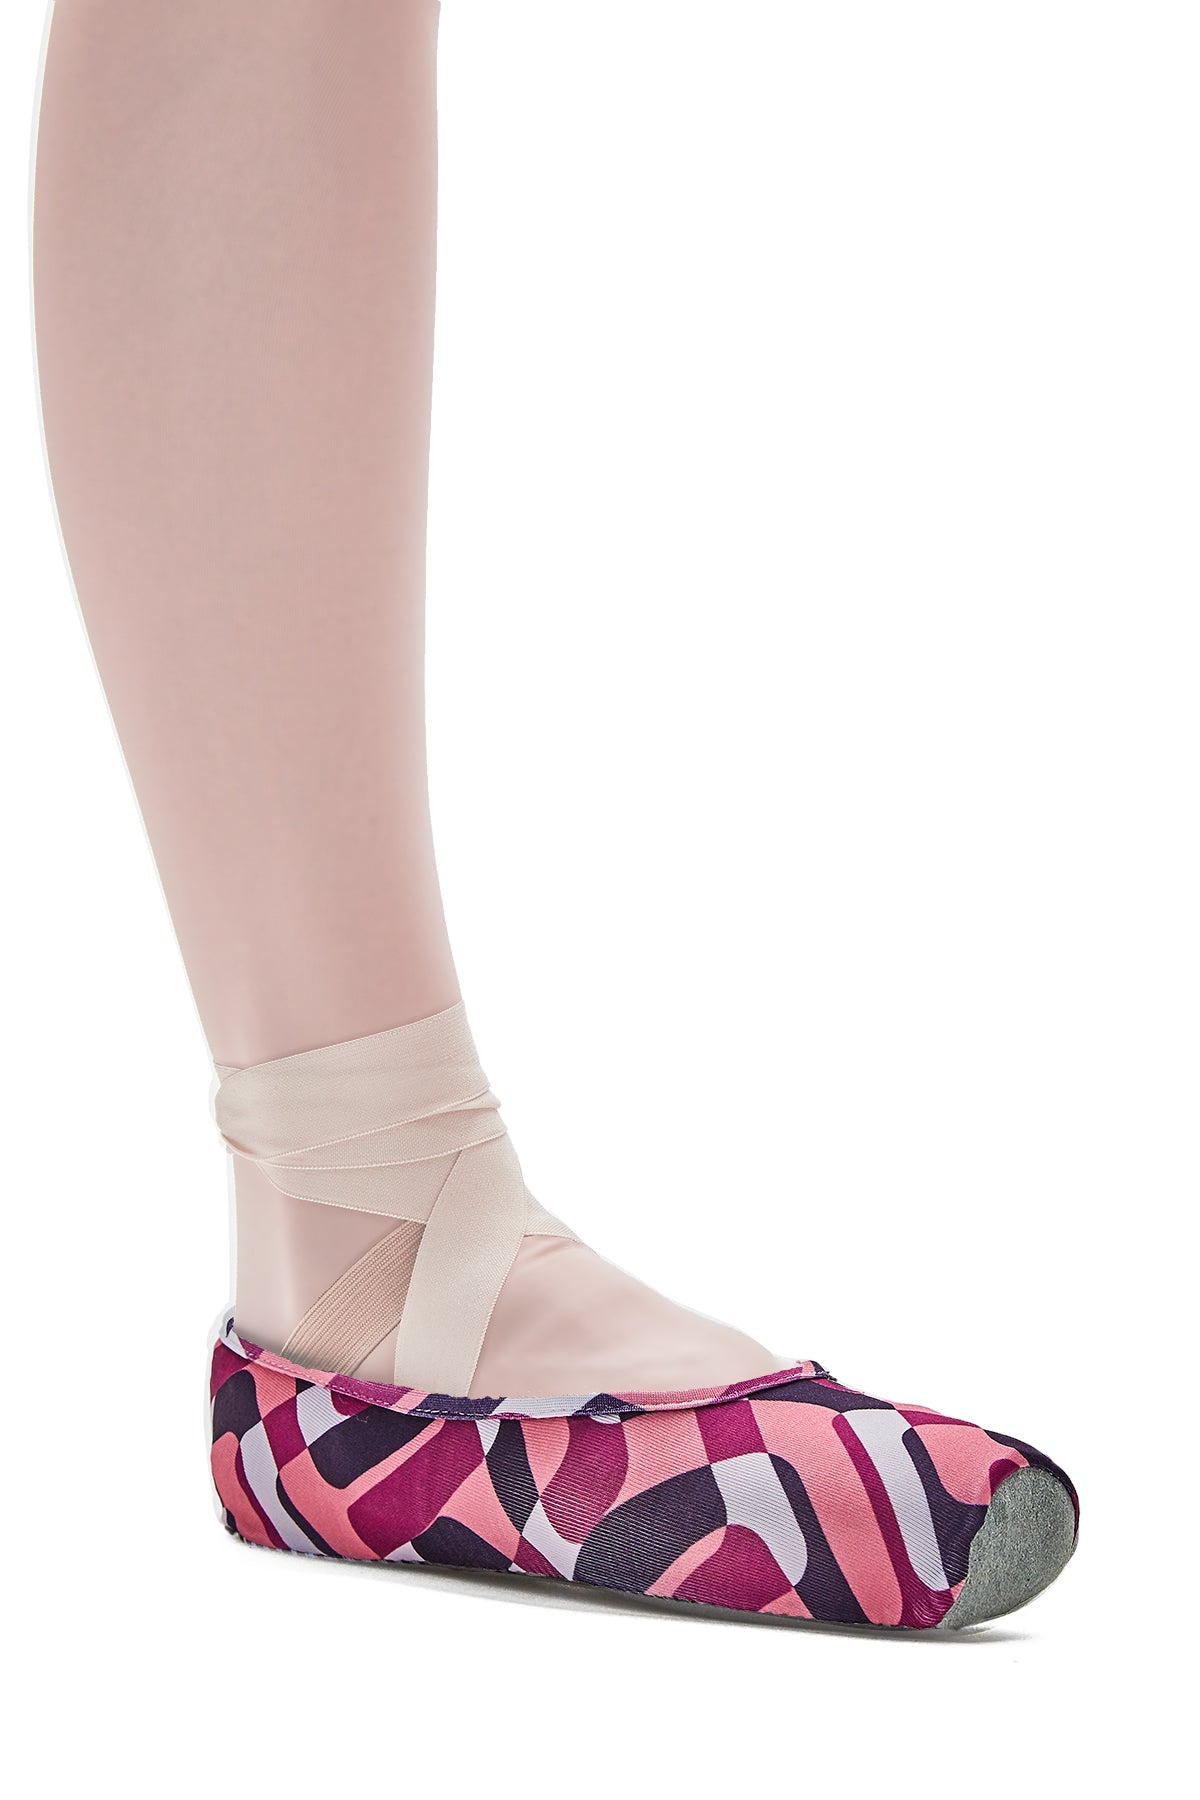 Pointe-Shoe Covers - AC12